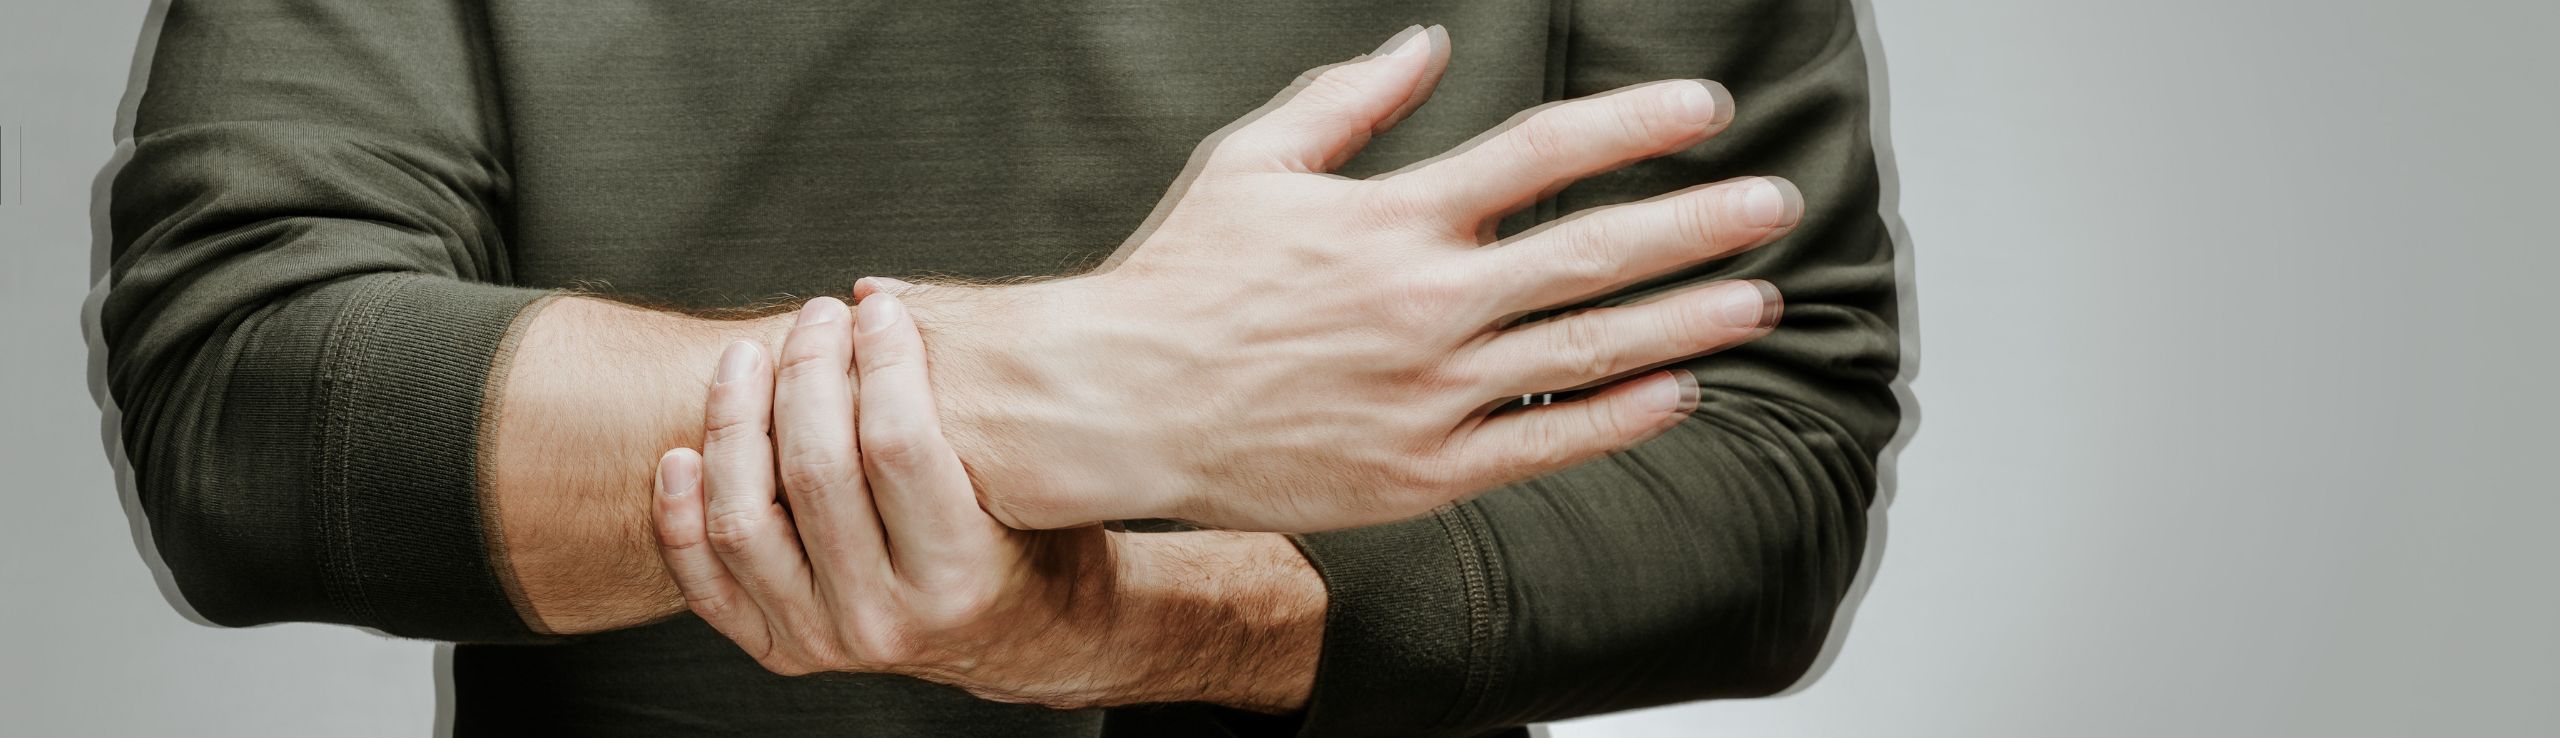 Image of somone holding their wrist from pain.